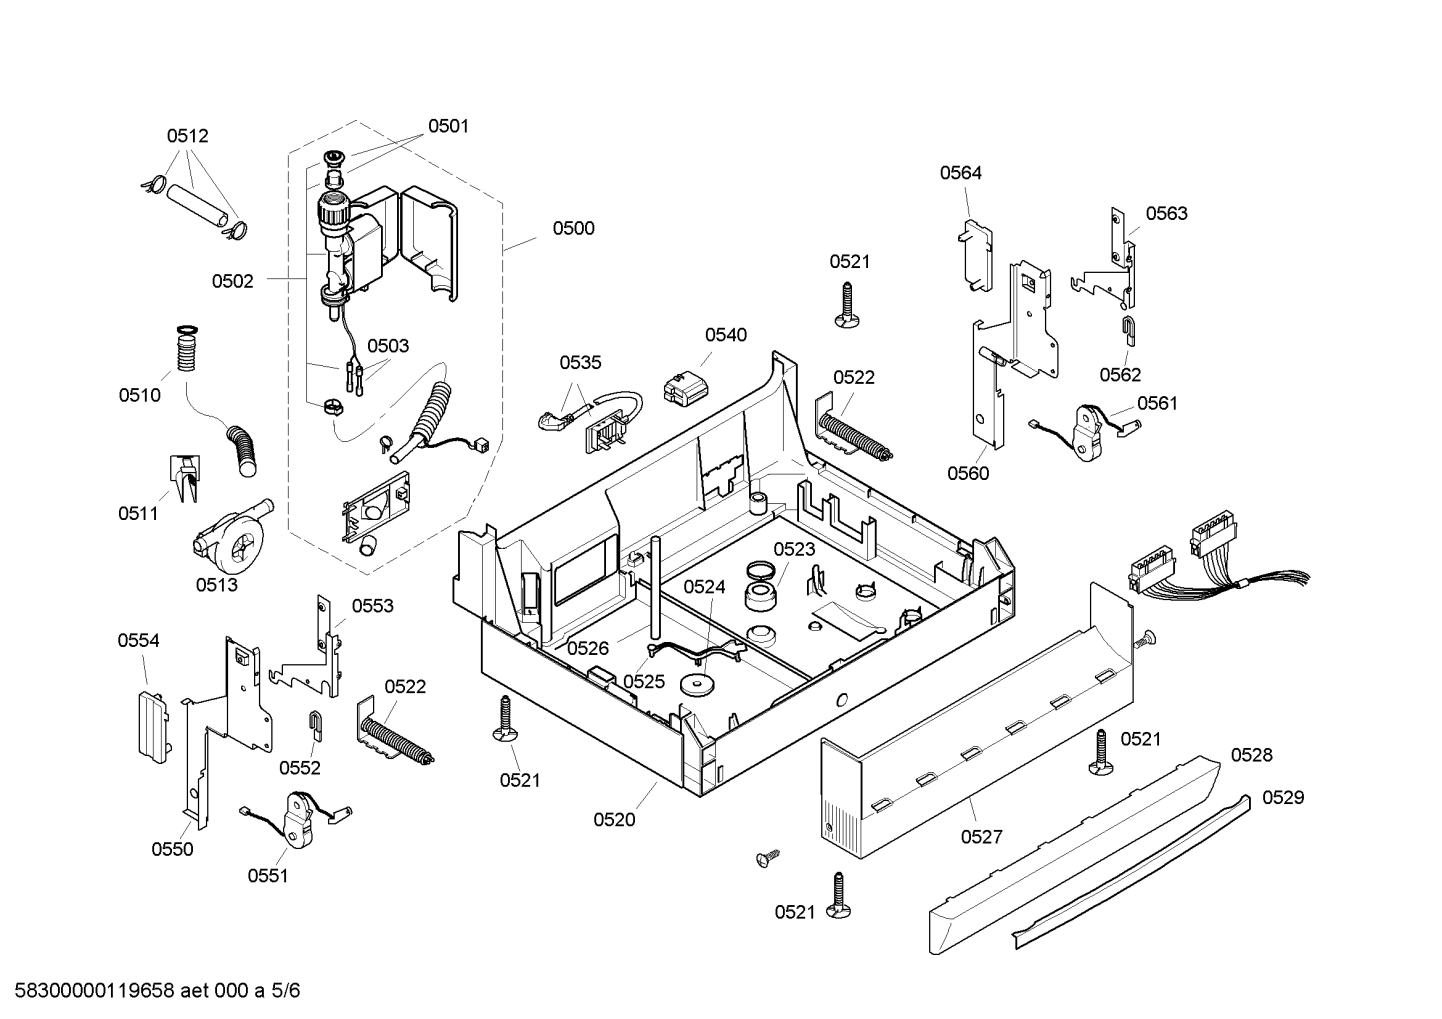 drawing_link_5_device_1267000